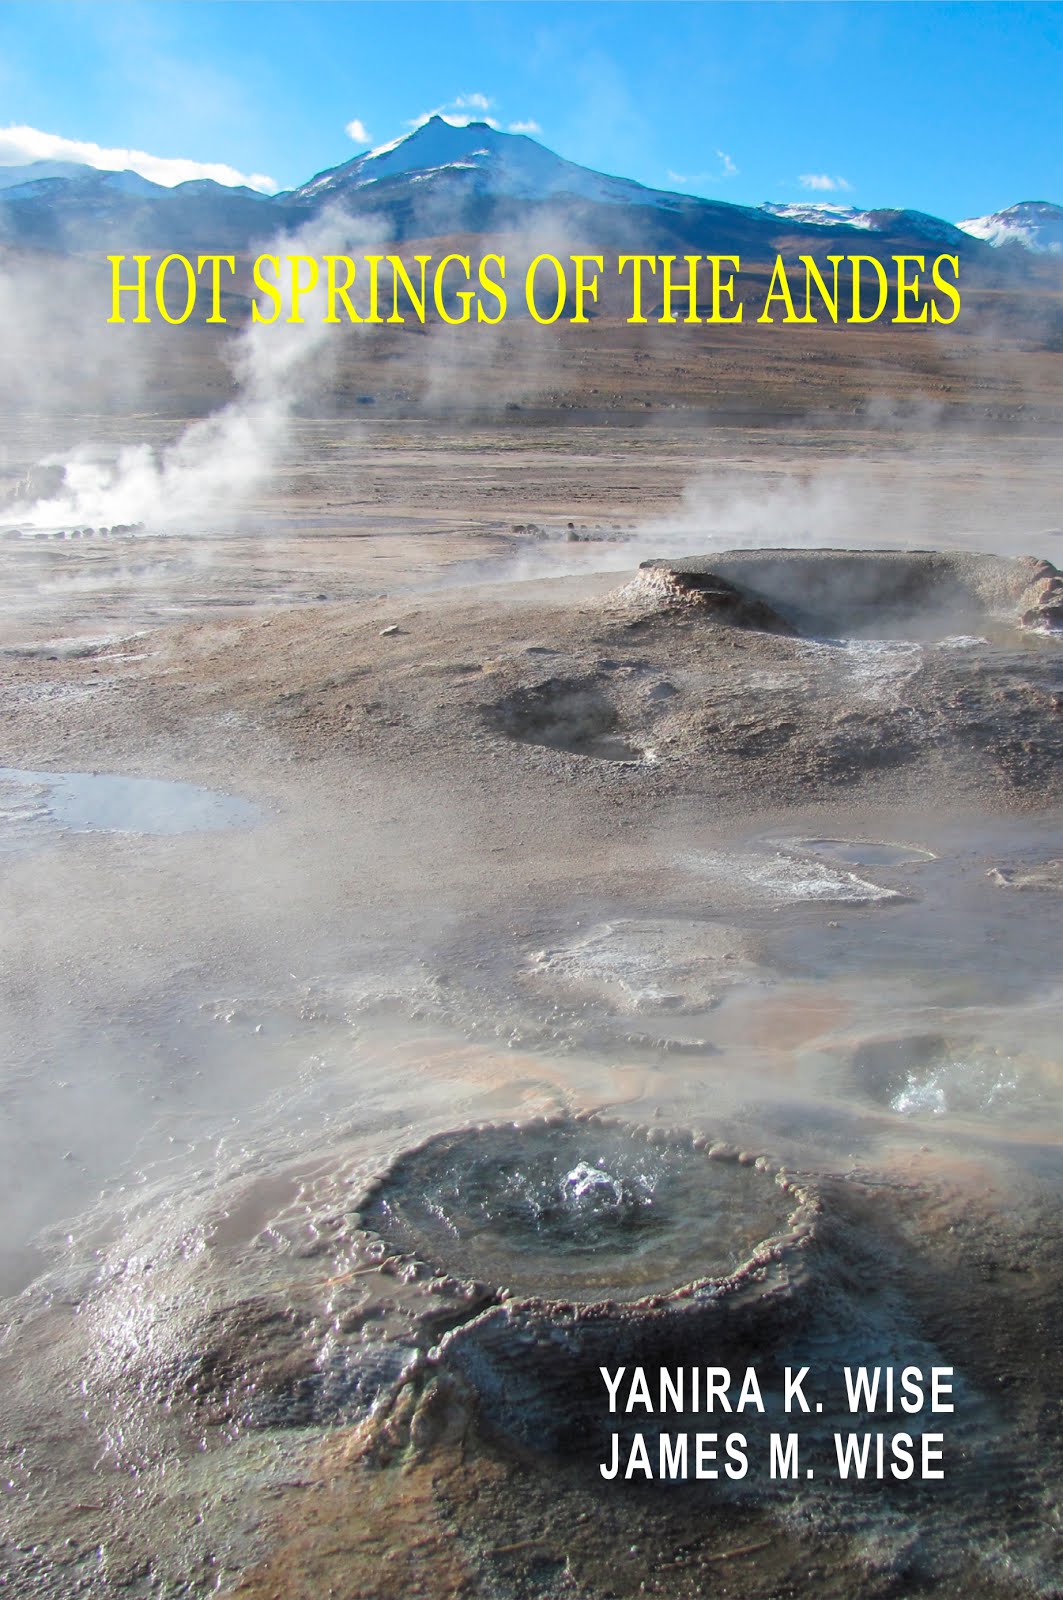 HOT SPRINGS OF THE ANDES